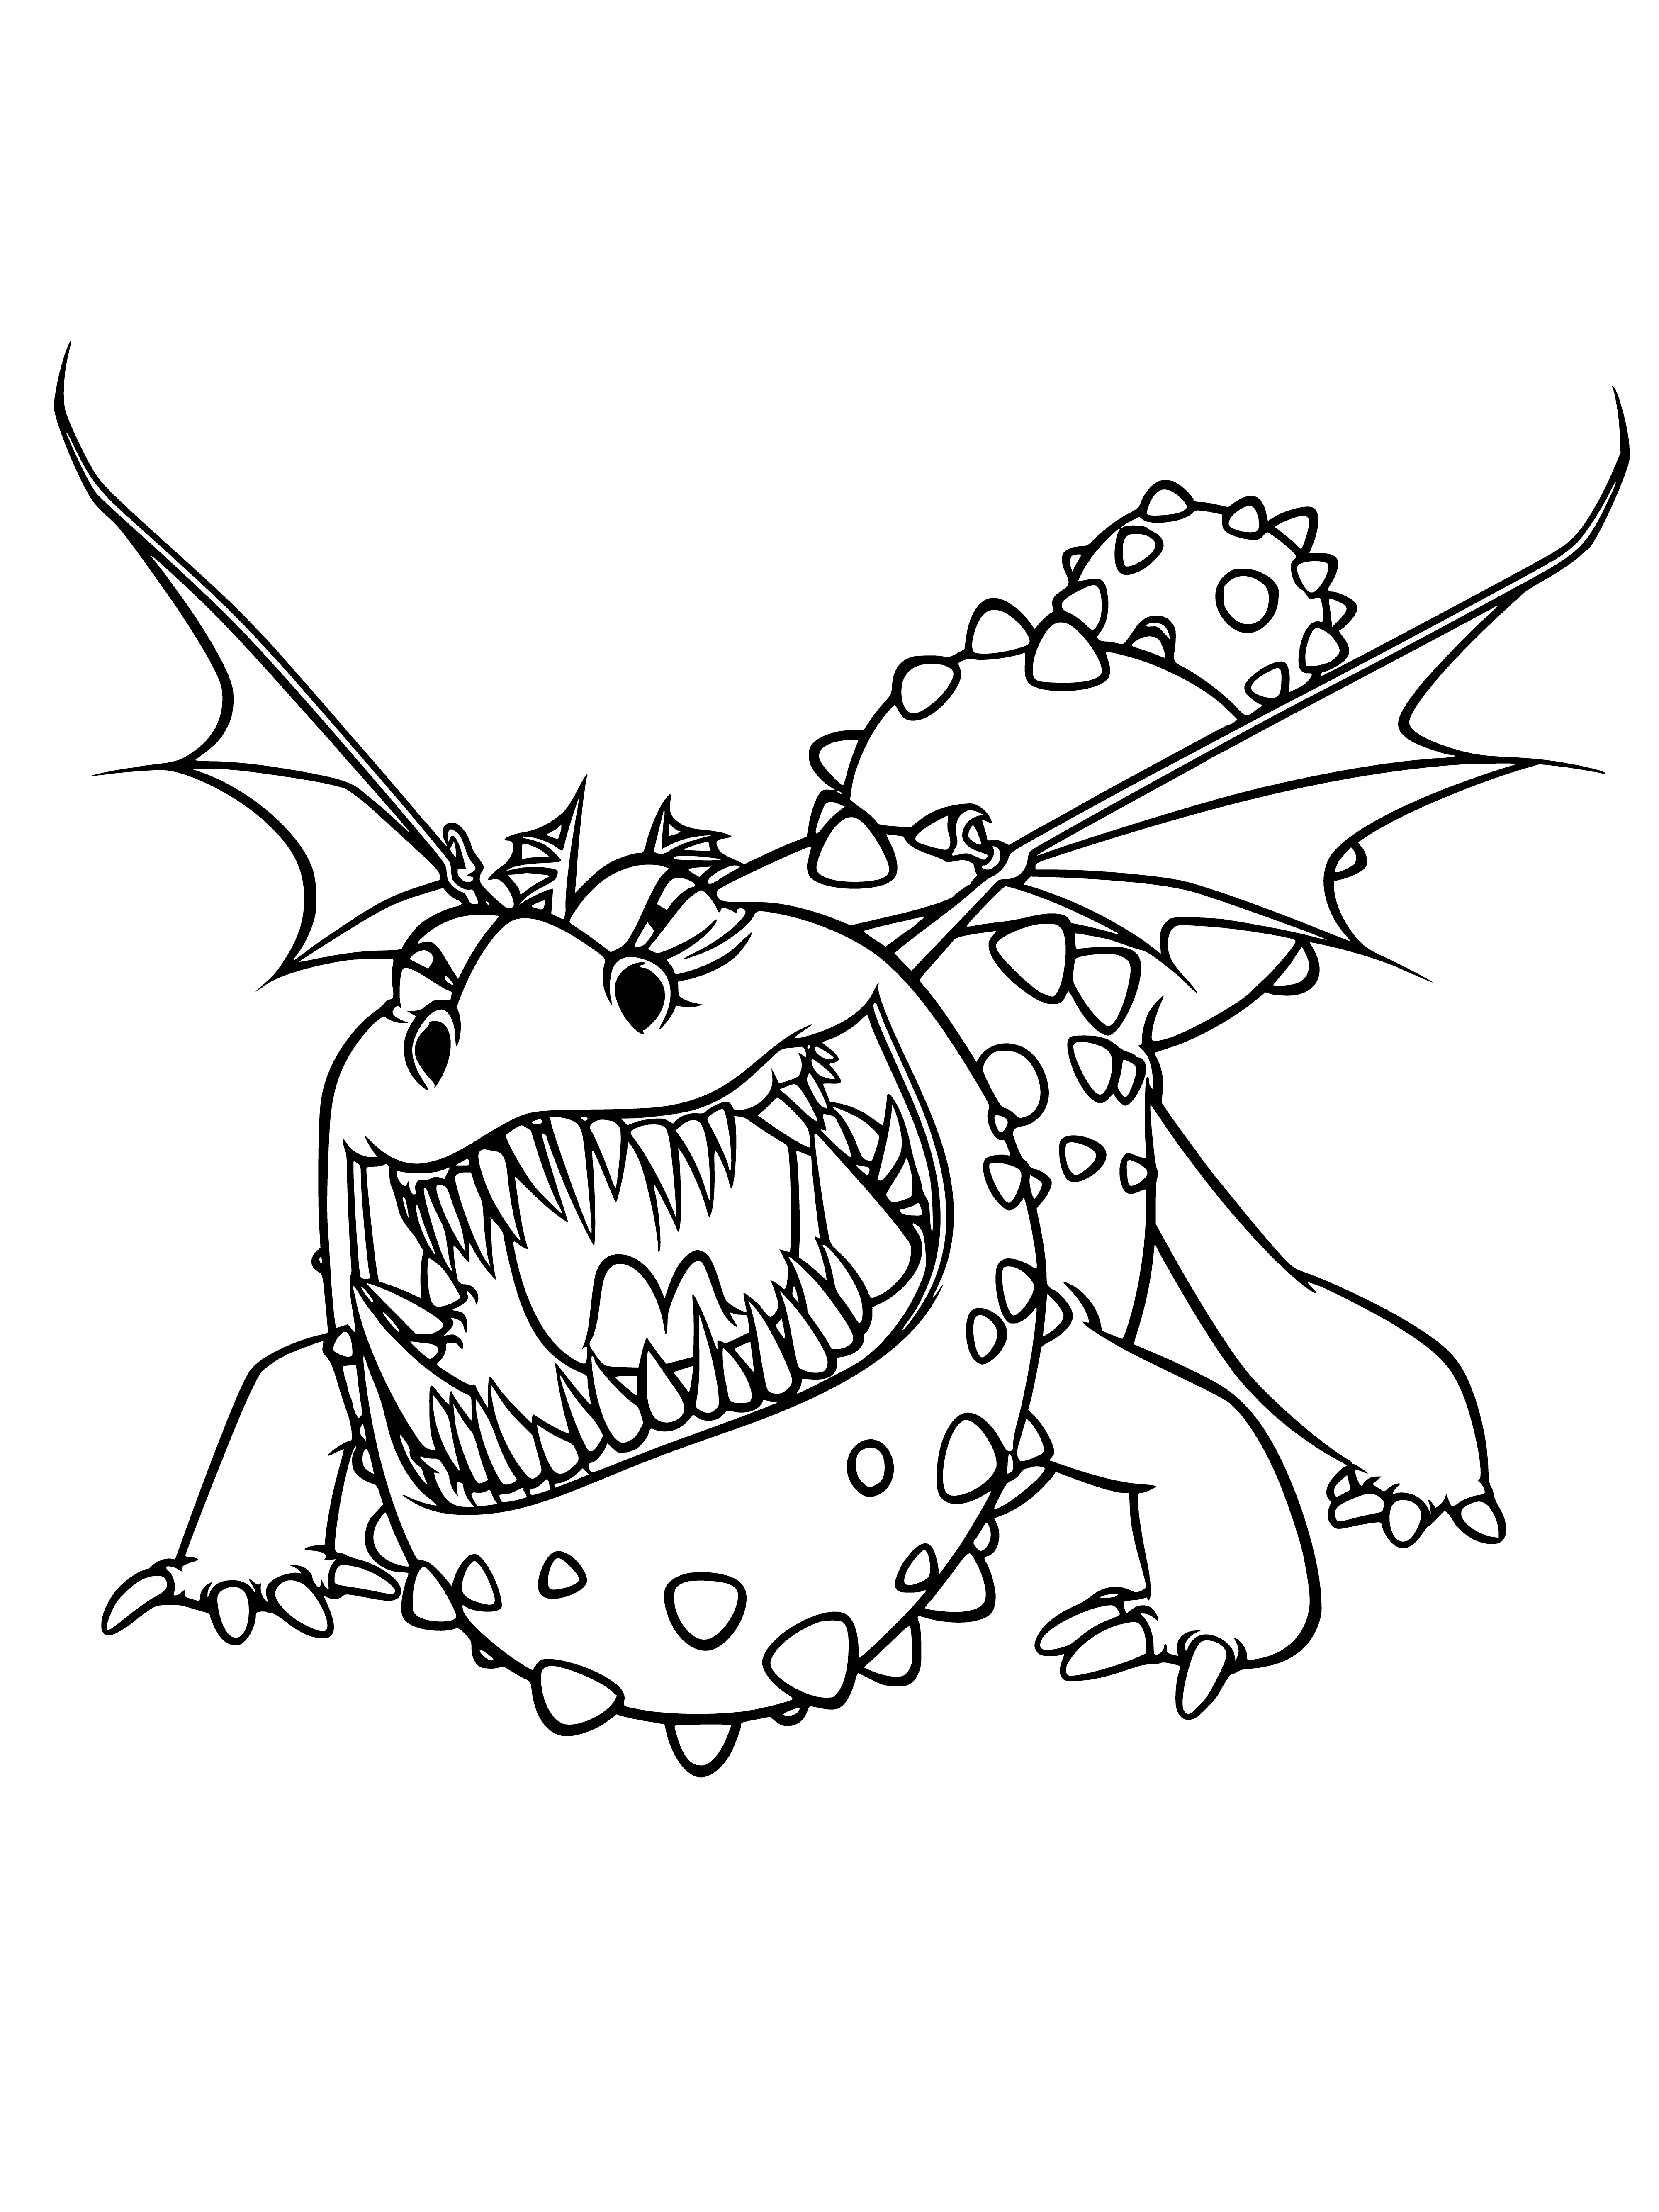 coloring page: Large dragon w/ orange scales, spikes, wings, & long tail. Sharp teeth & open mouth.